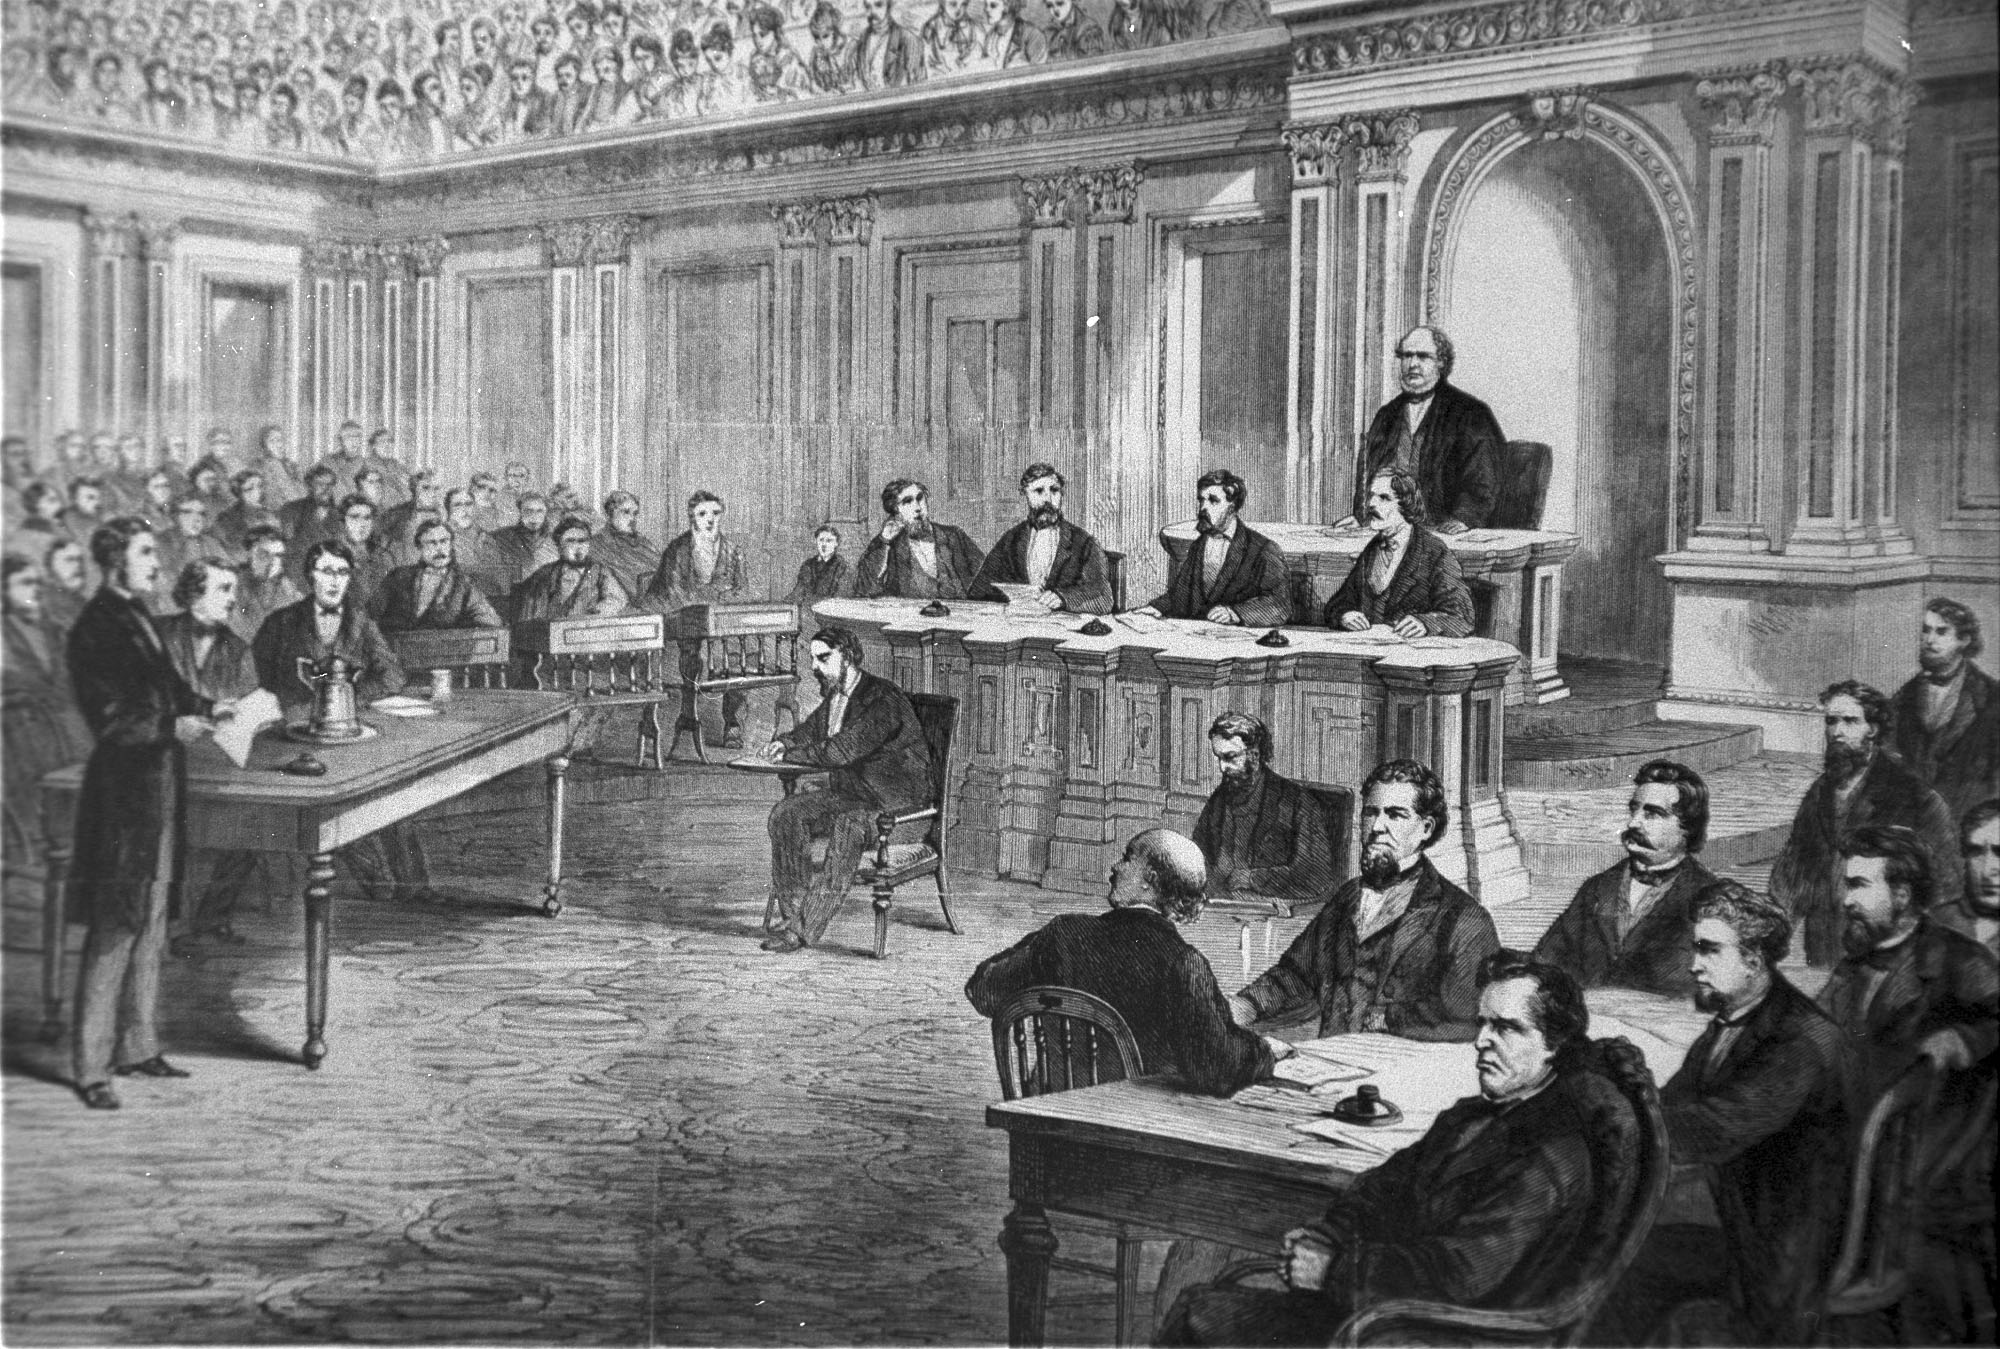 An engraving showing the impeachment trial of President Andrew Johnson in the Senate on March 13, 1868